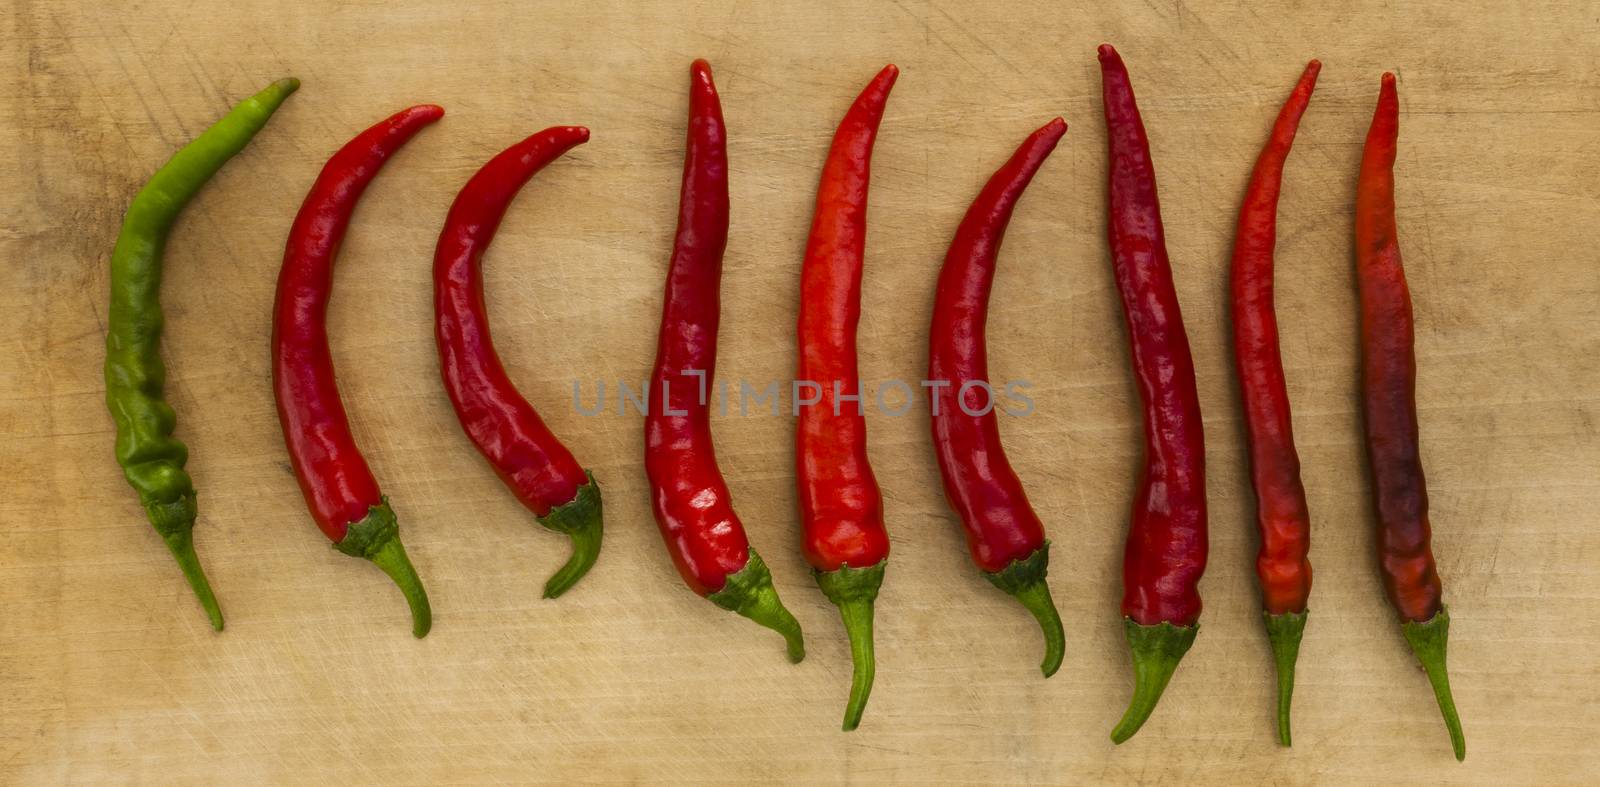 red chili pepers in a row on wood background green one is the leading